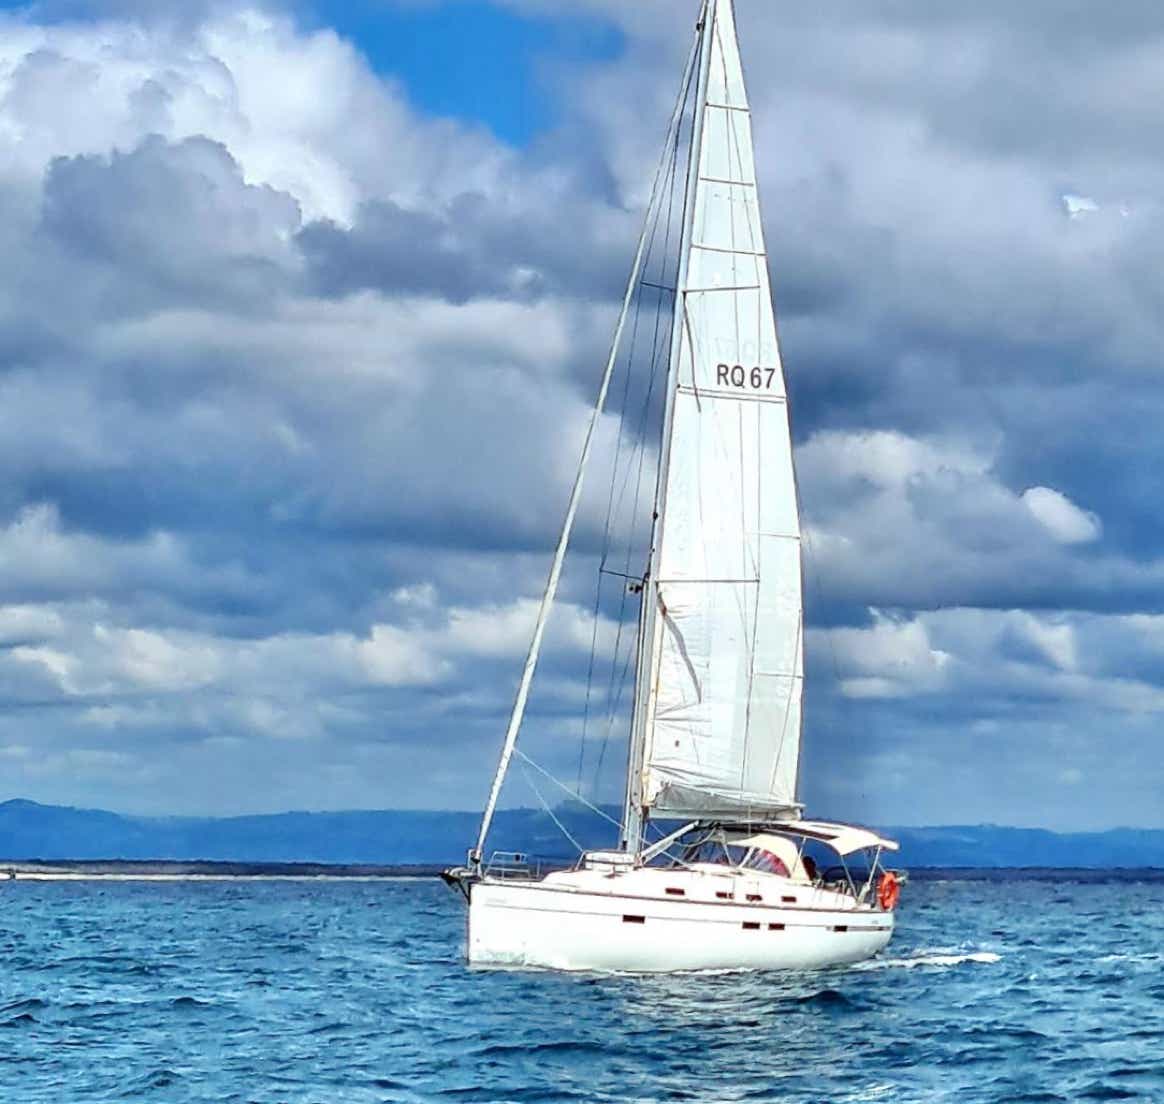 Yacht under sail on a private yacht charter on Curlew Escape, Moreton Bay, Brisbane.